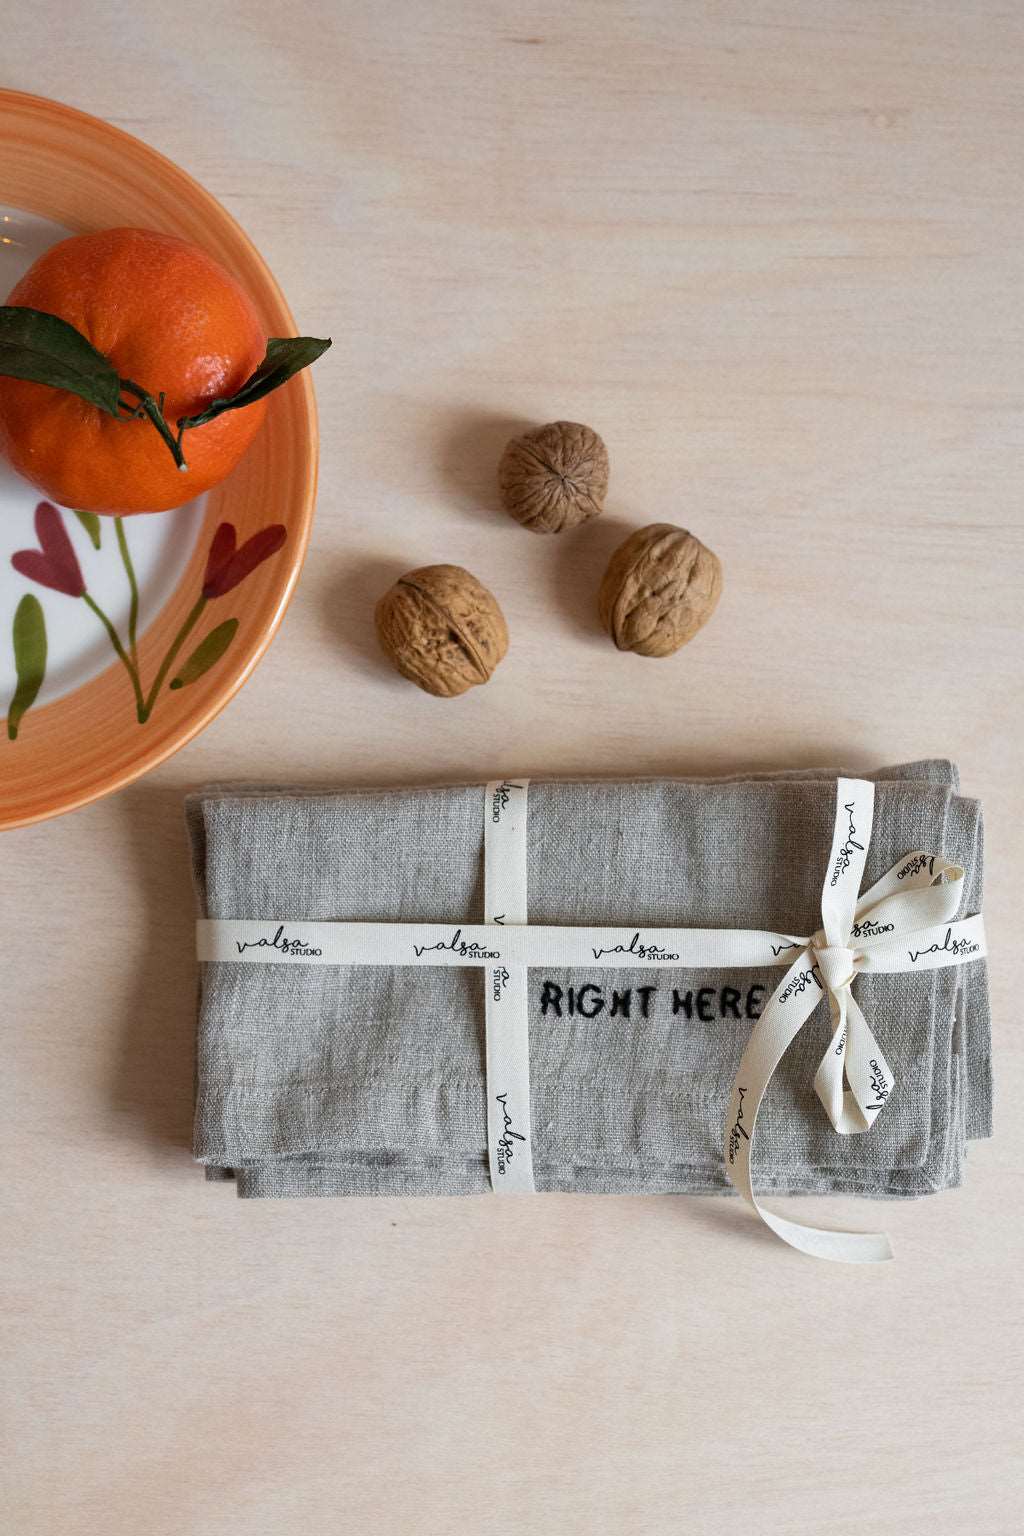 Hand-Embroidered Linen Napkin - "Right Here"